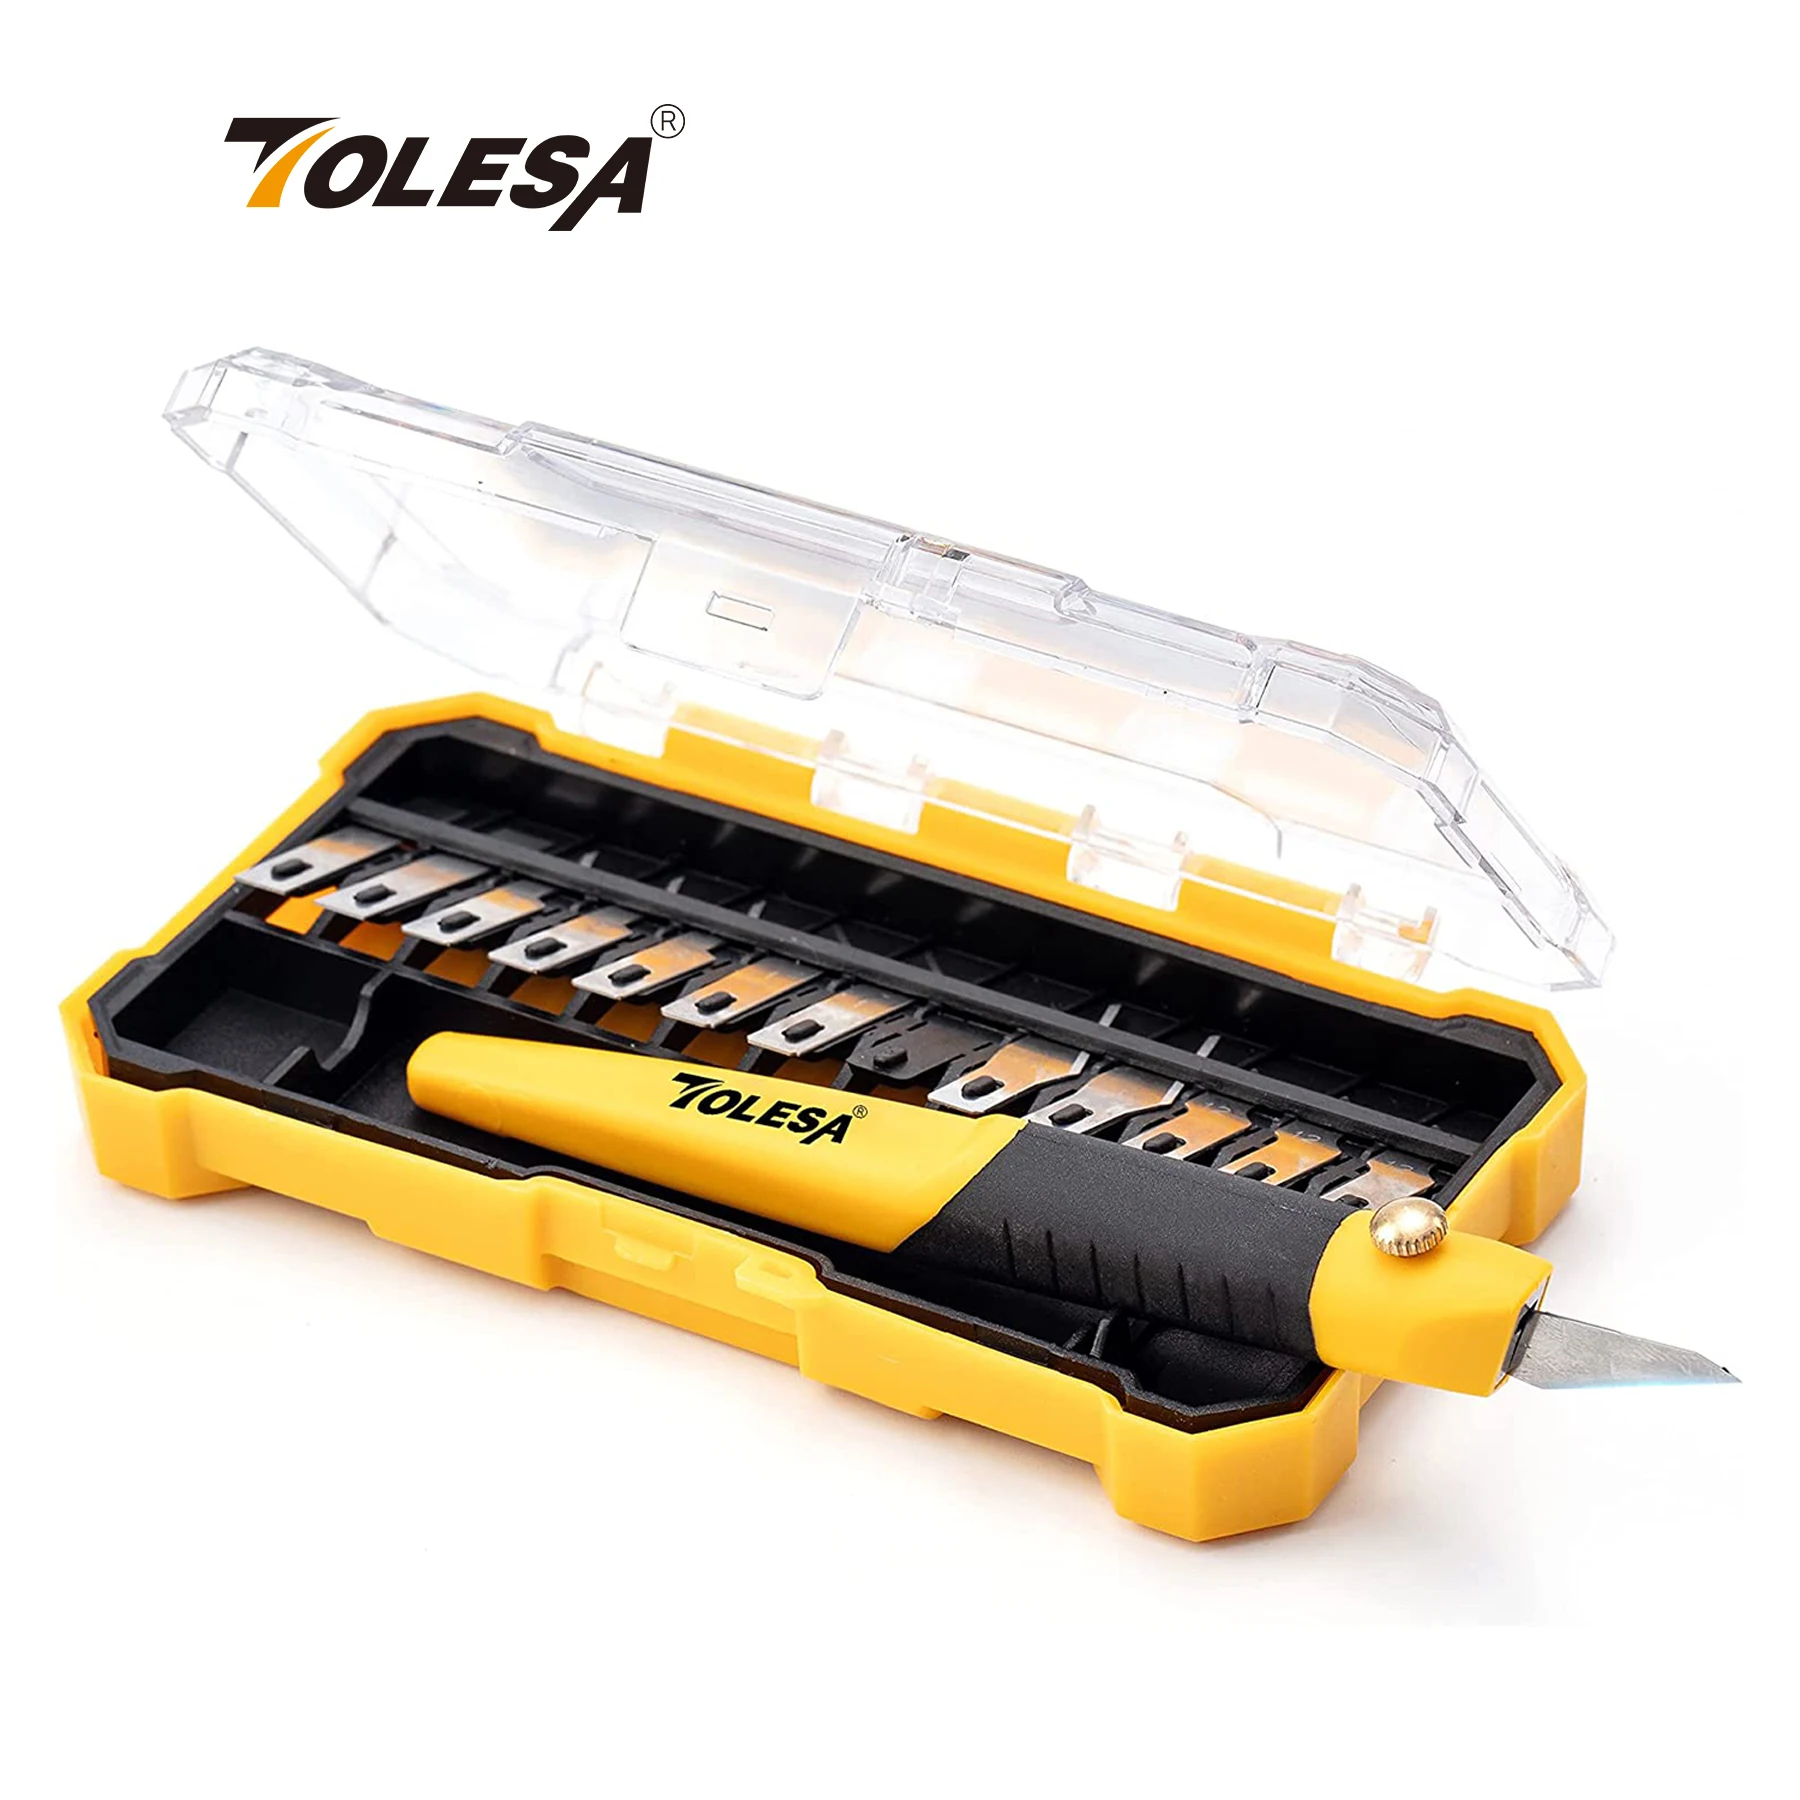 Tolesa Scalpel Craft Knife Set Soft Rubber Grip with 13 SK5 Steel Blades Suitable for Models Artwork Cutting Paper Cork Leather